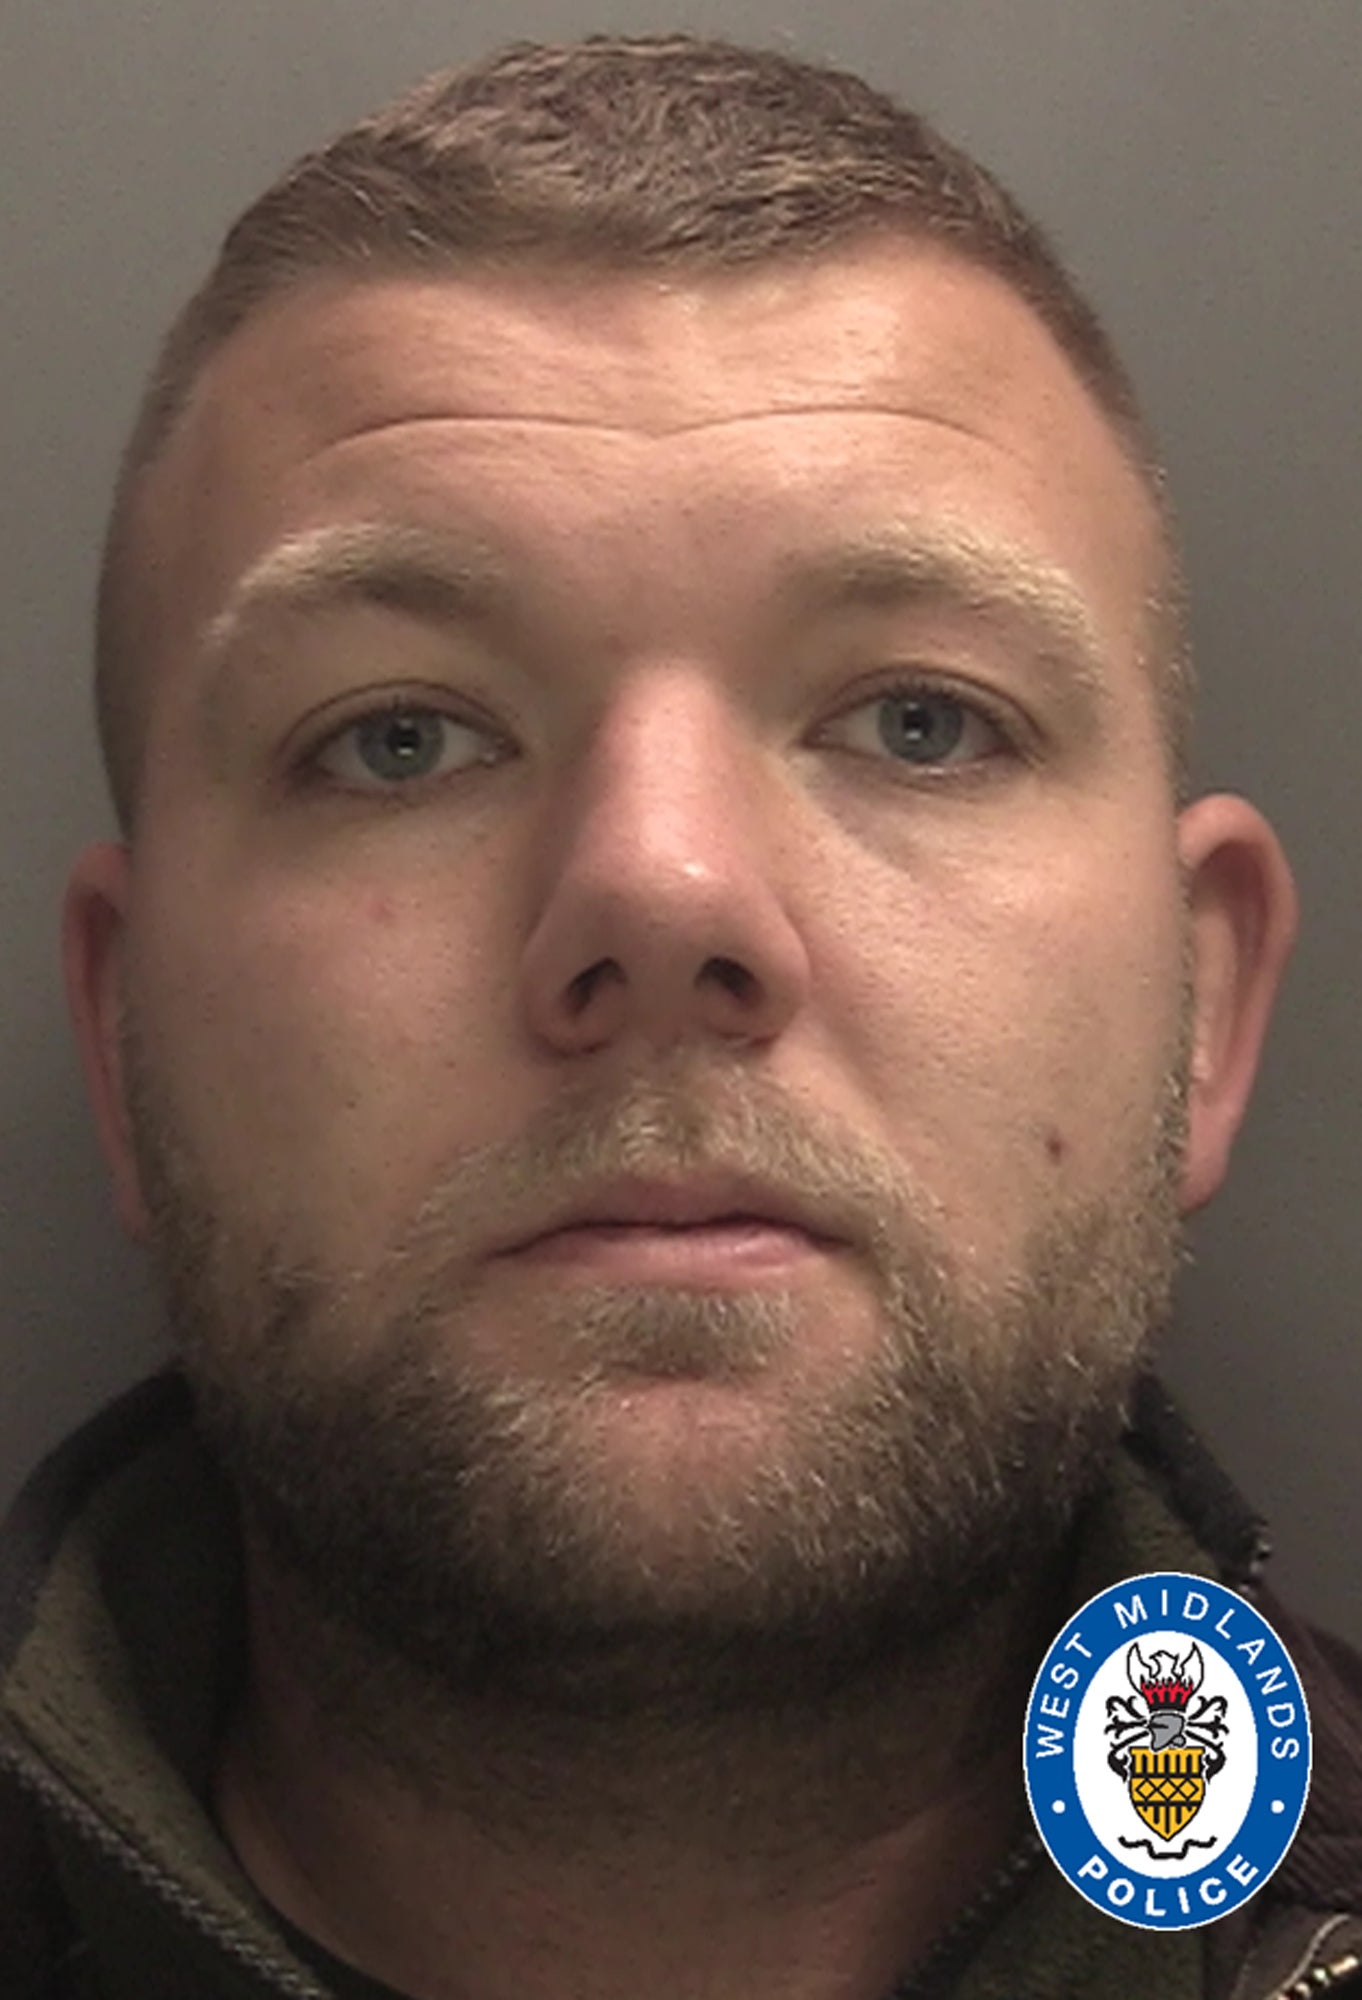 Declan Jones was found guilty of assaulting two members of the public on consecutive days during the first Covid lockdown (West Midlands Police/PA)